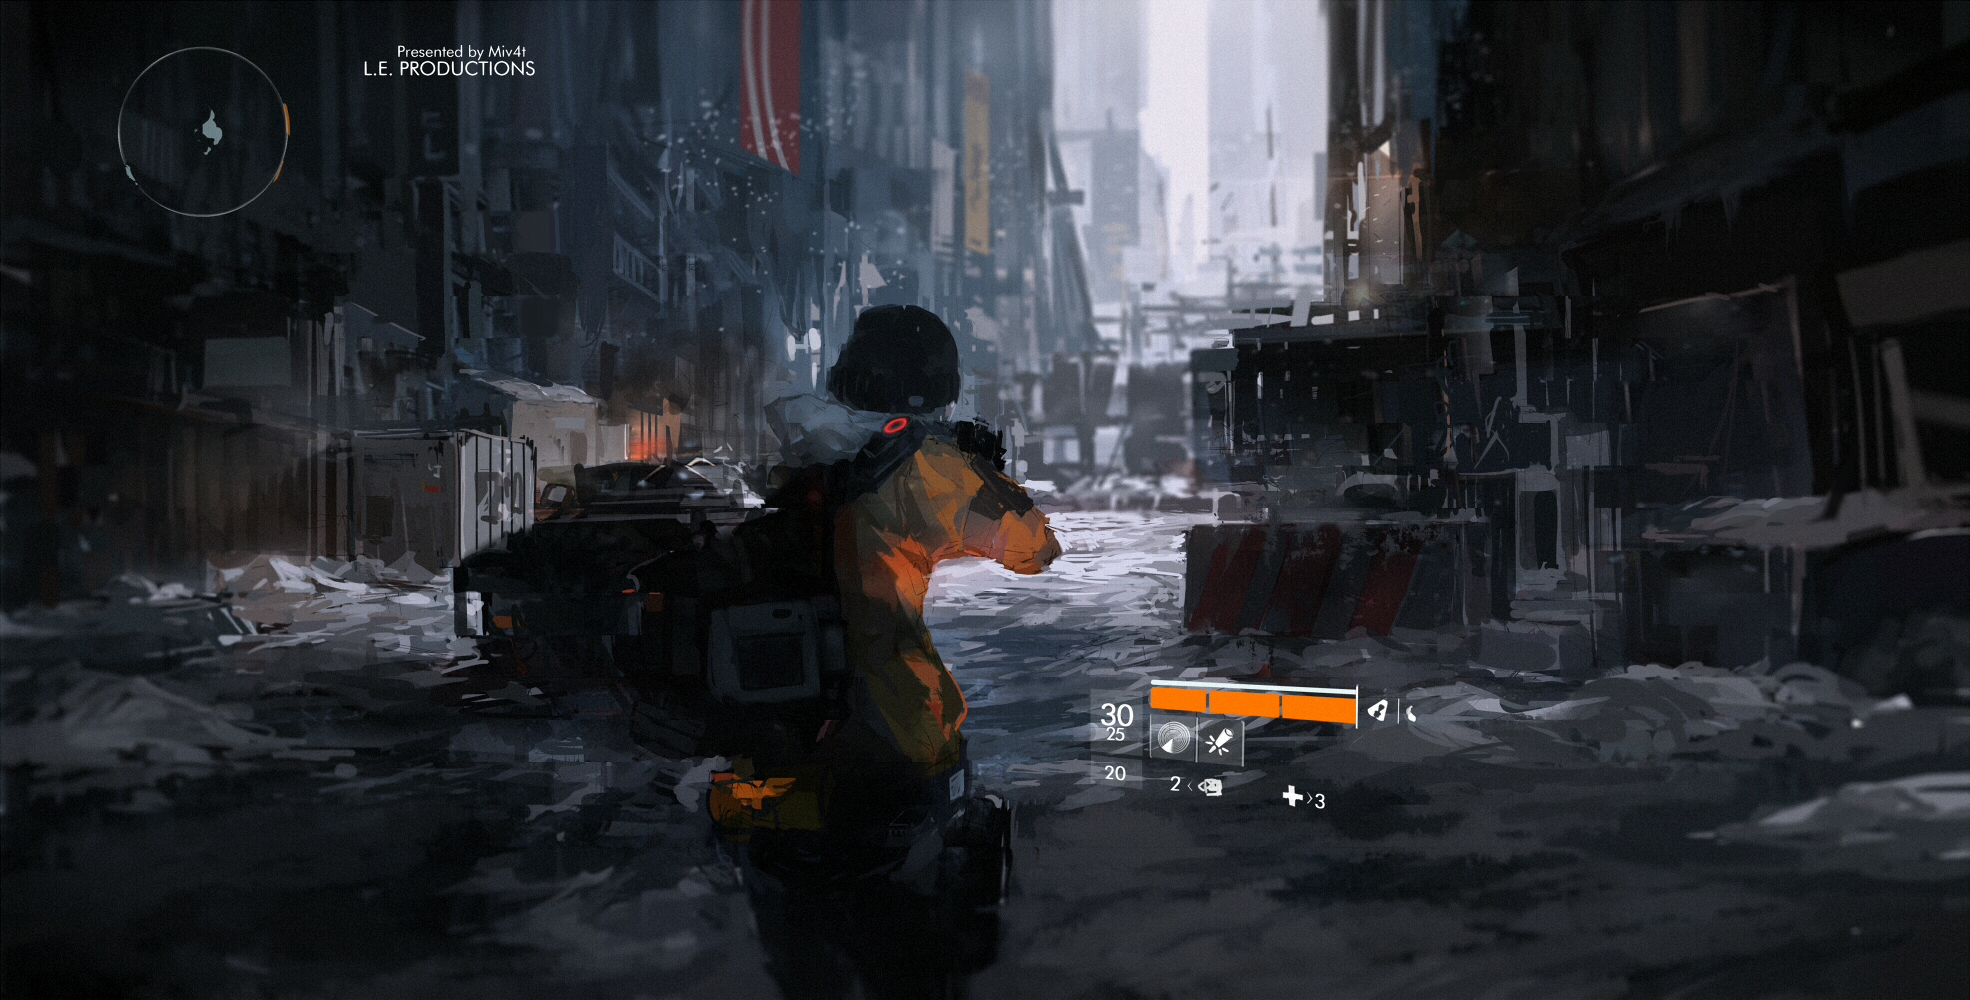 Anime 1970x1000 anime anime girls Tom Clancy's The Division Miv4t